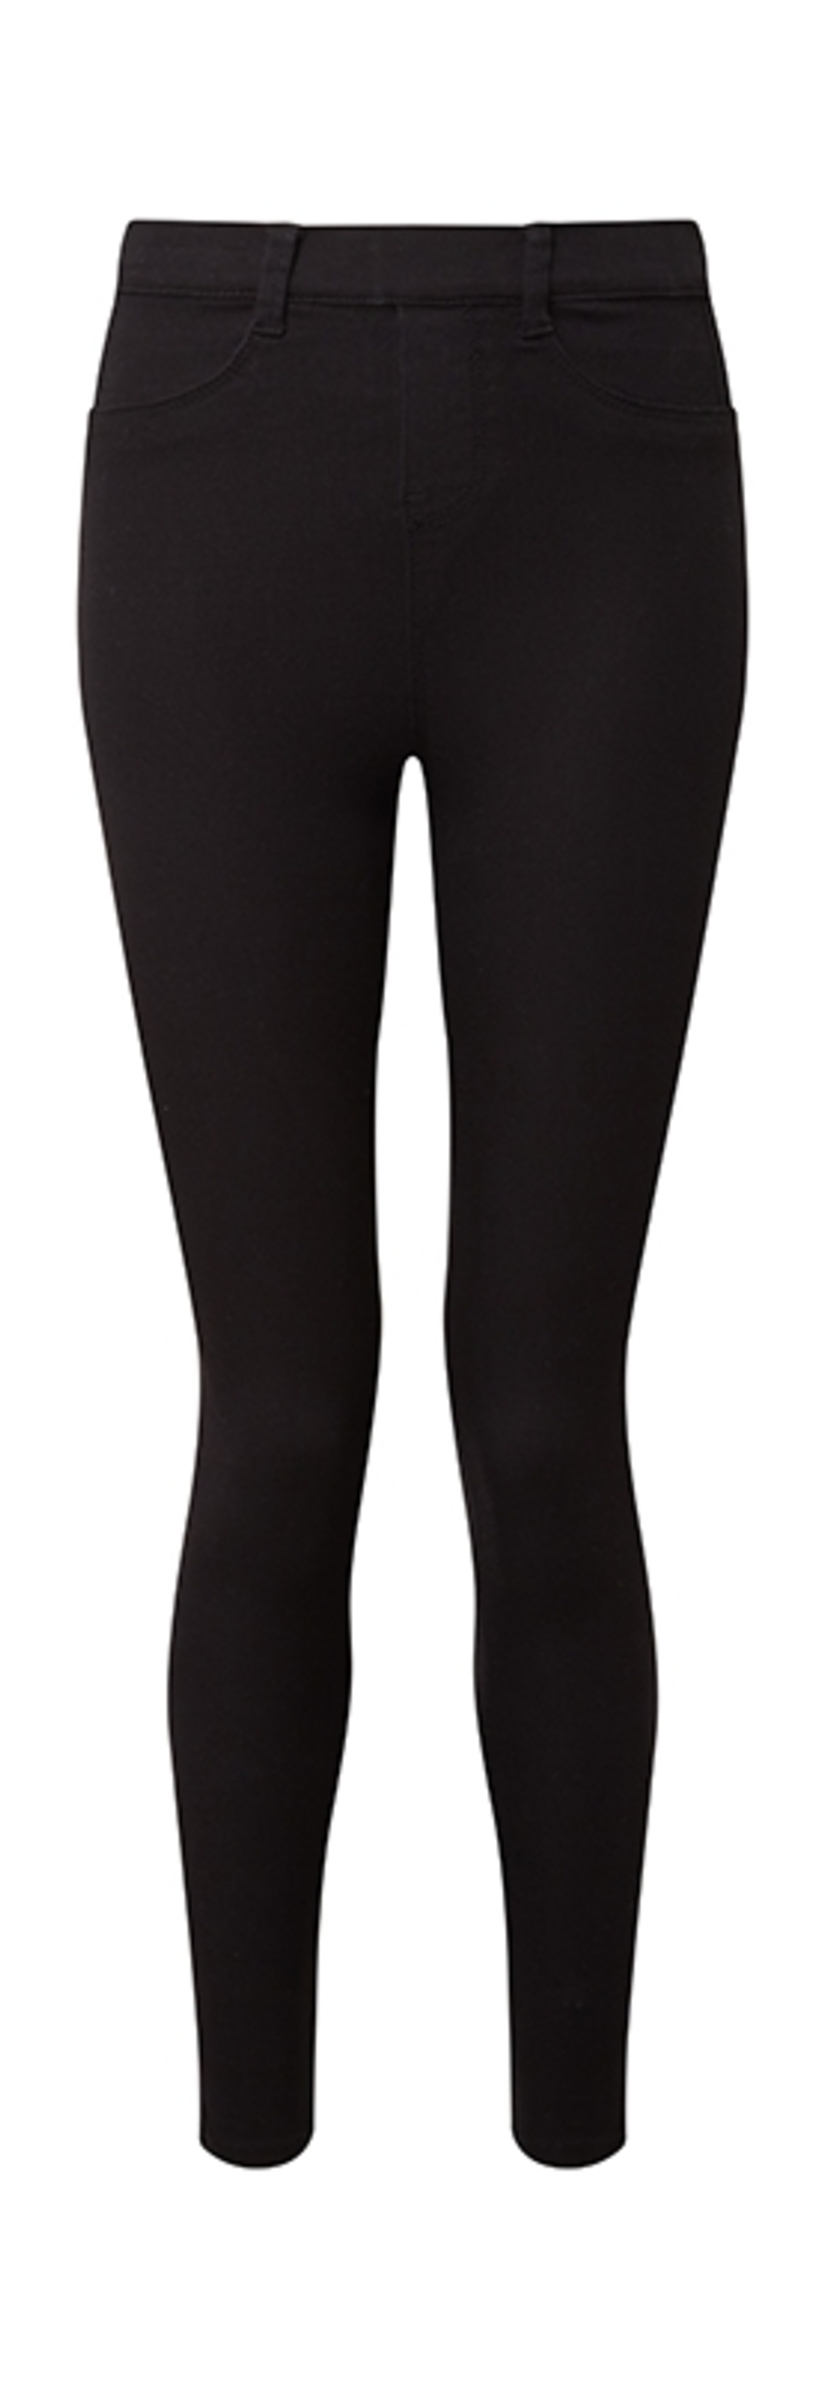 Asquith Womens Jeggings